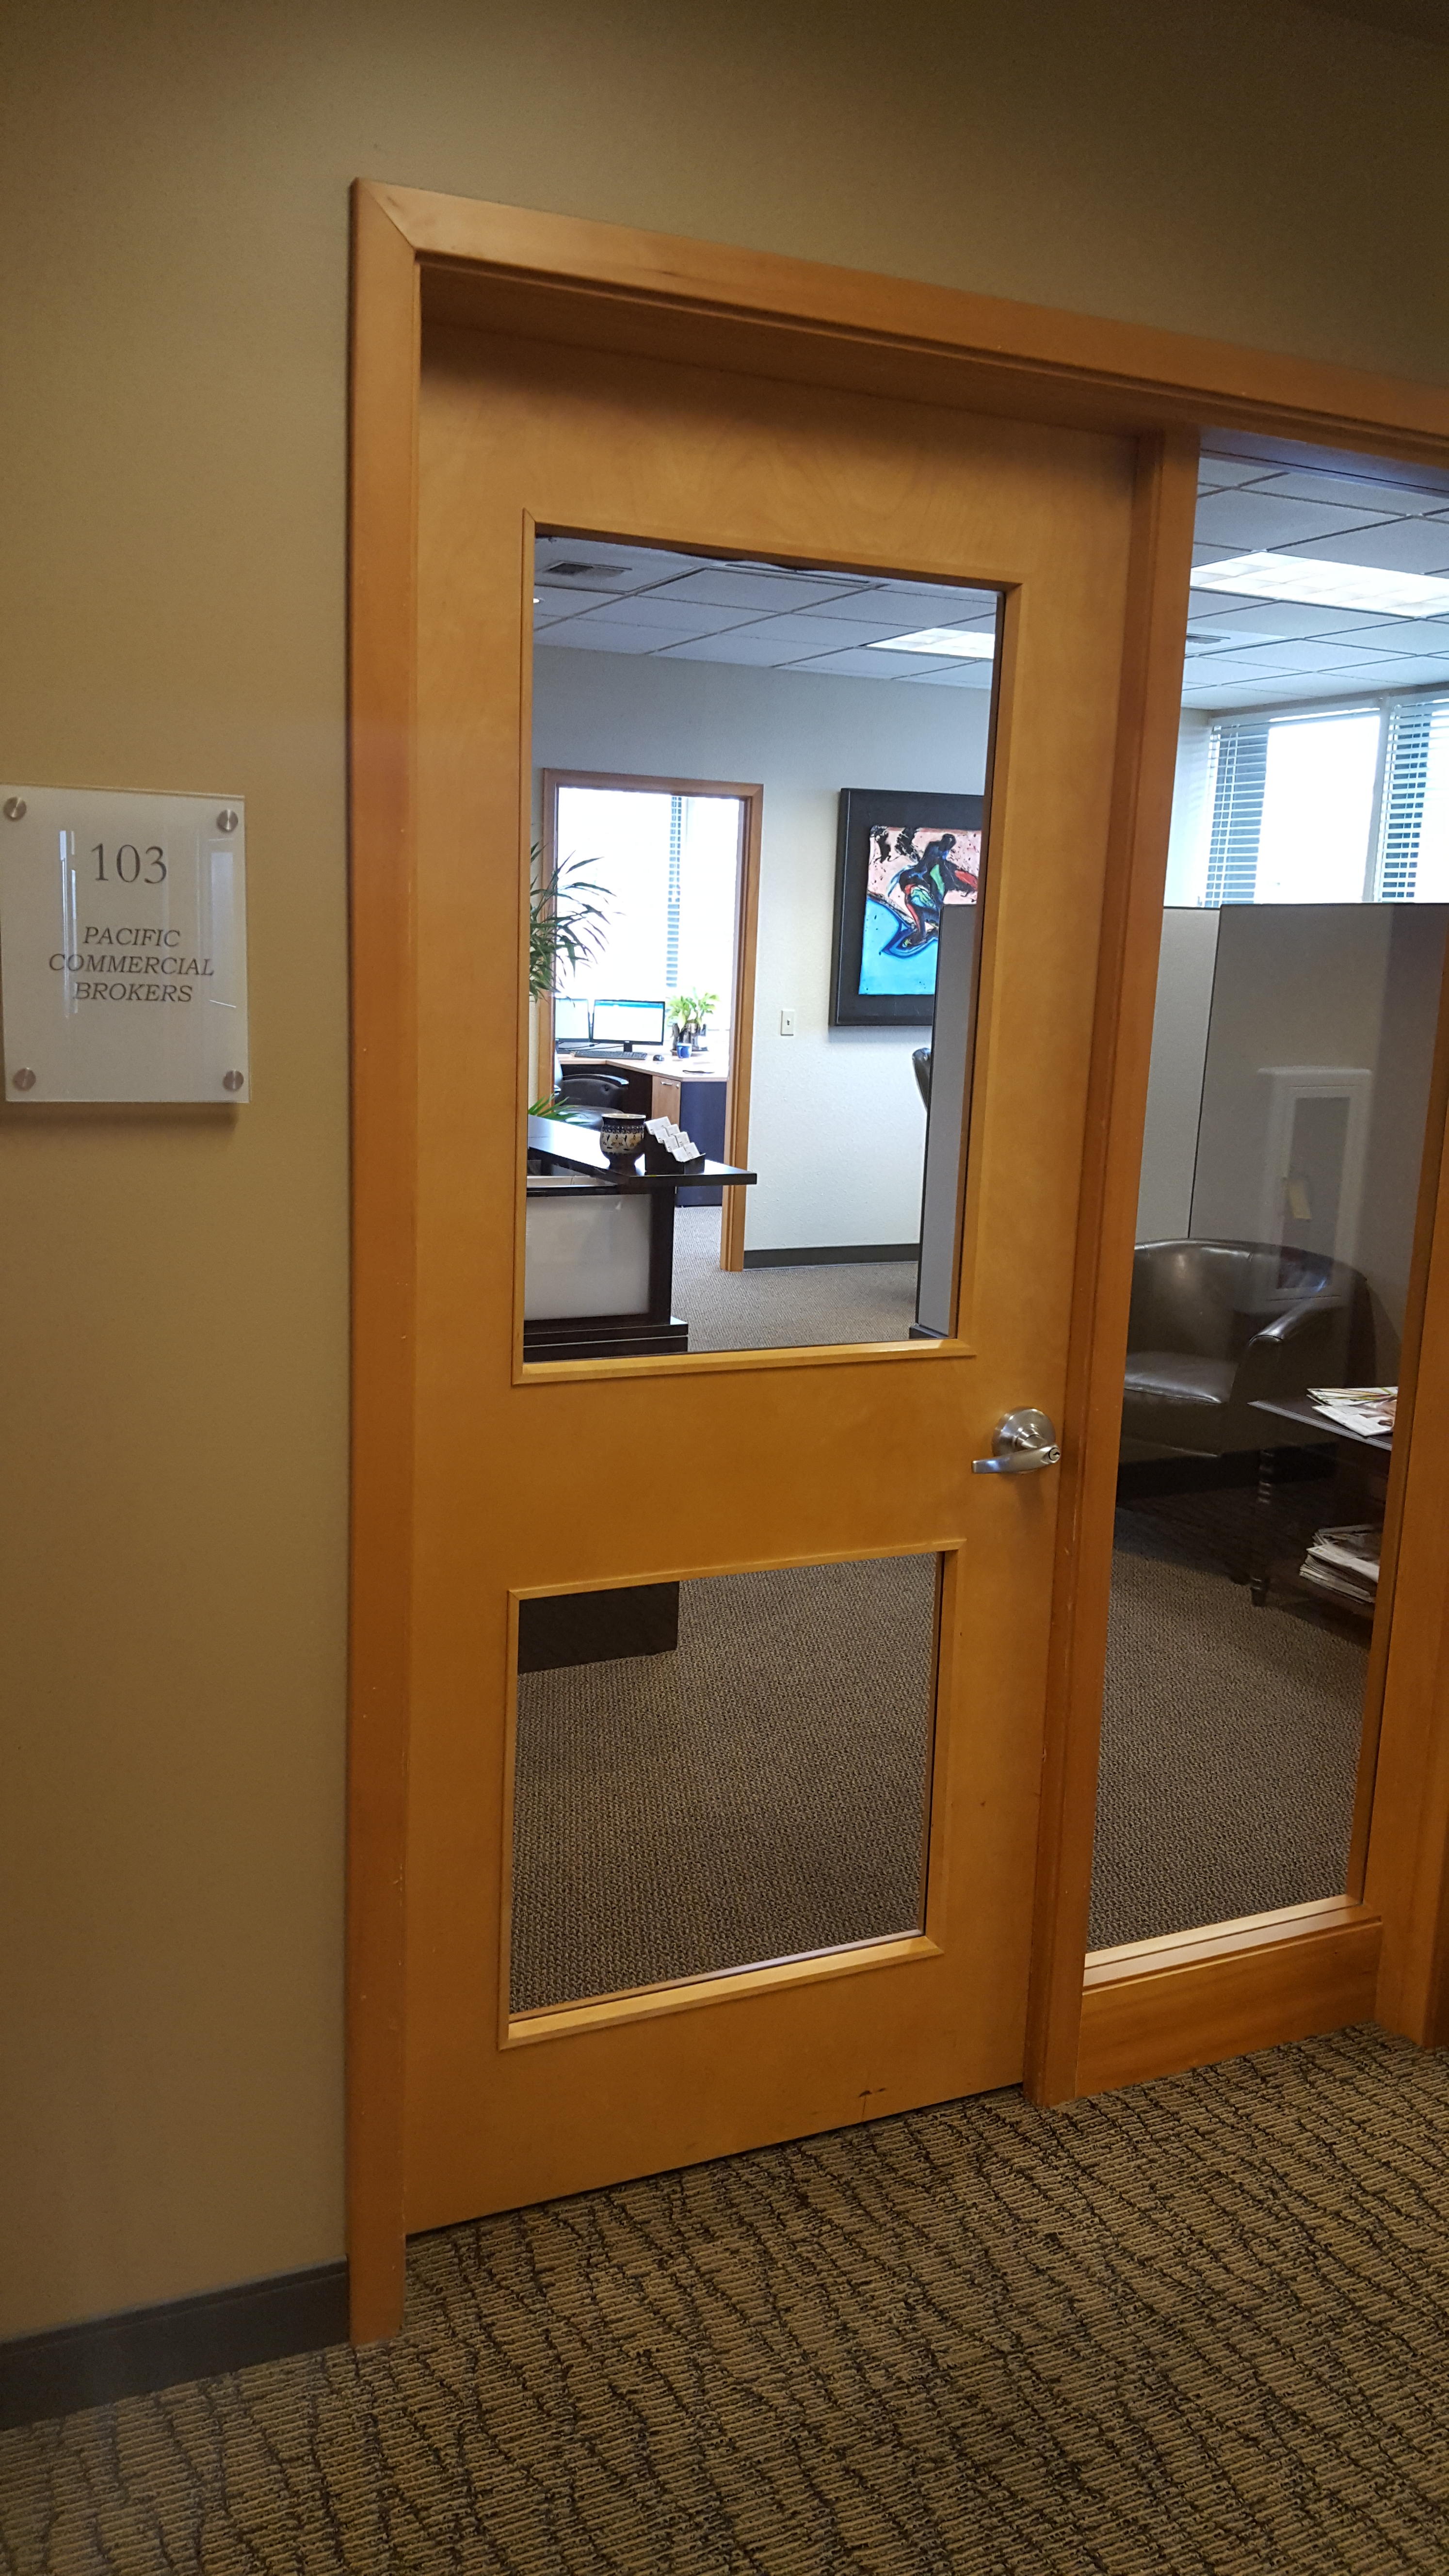 Entry to Pacific Commercial Brokers Office